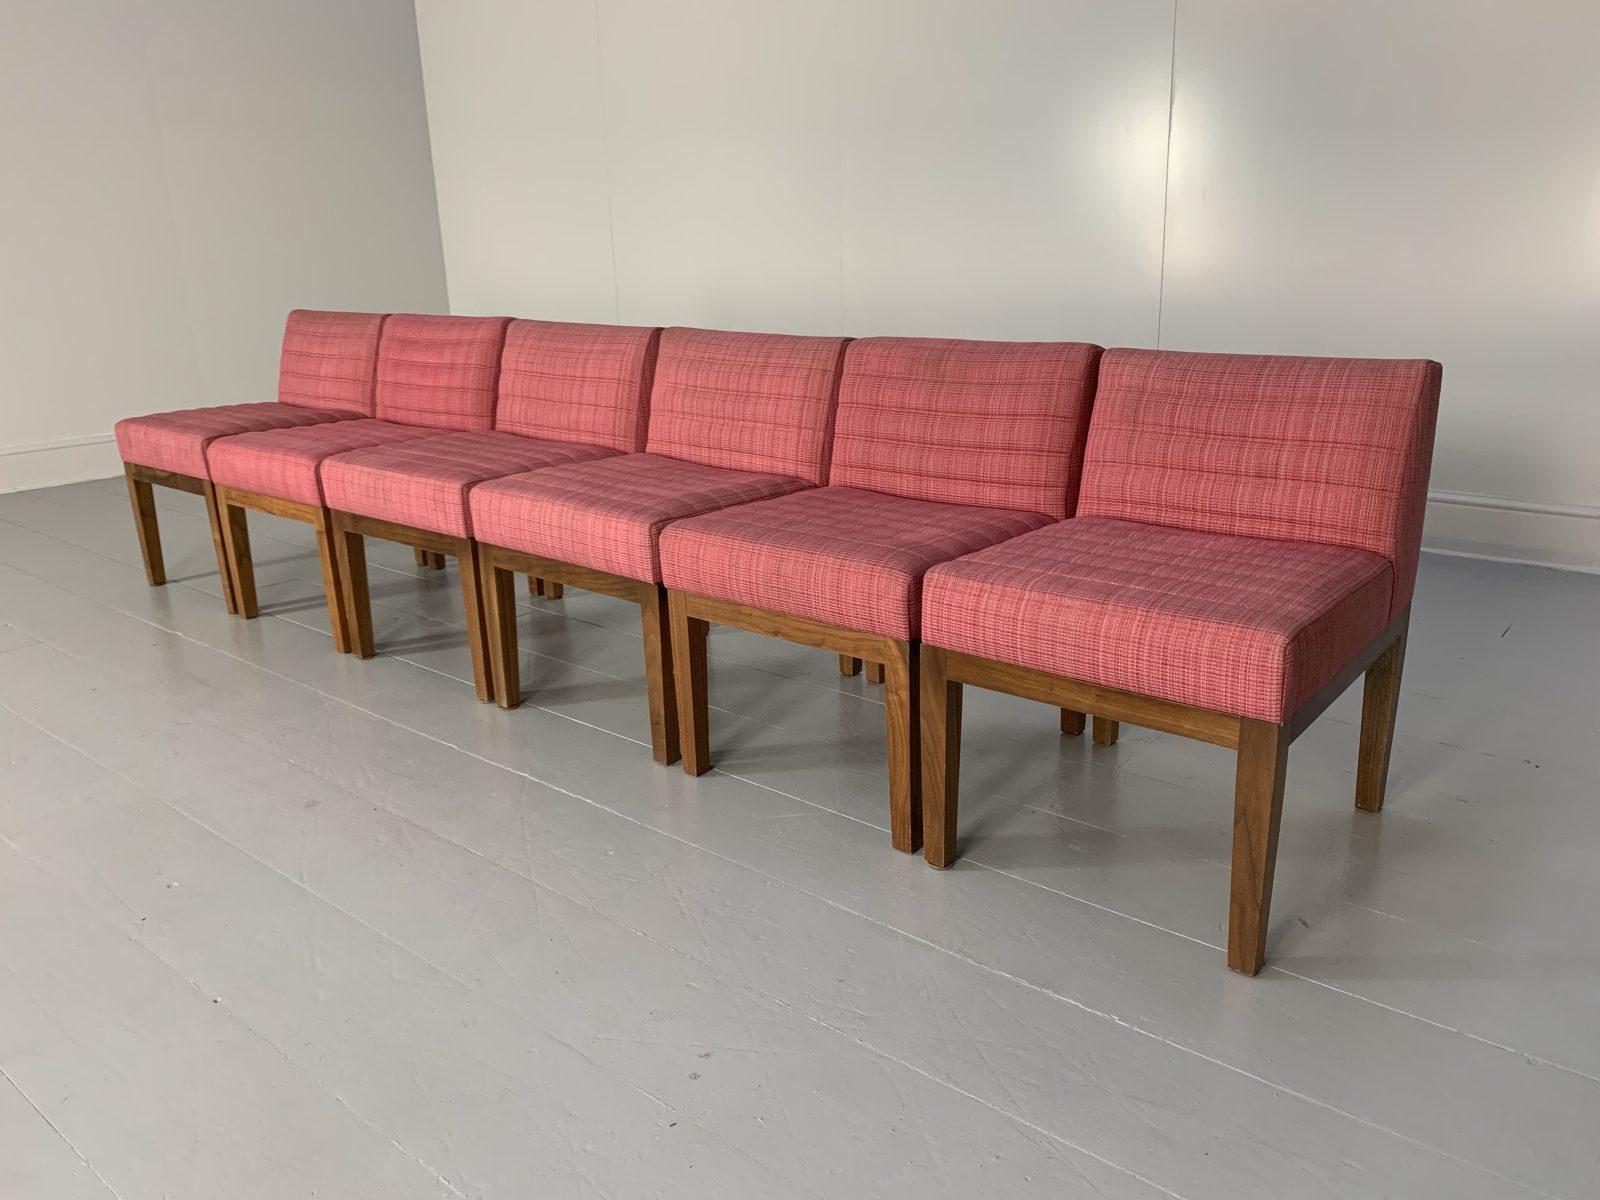 Hello Friends, and welcome to another unmissable offering from Lord Browns Furniture, the UK’s premier resource for fine Sofas and Chairs.

On offer on this occasion is a superb suite of 6 David Linley “Dice” Dining/Side Chairs, dressed in a